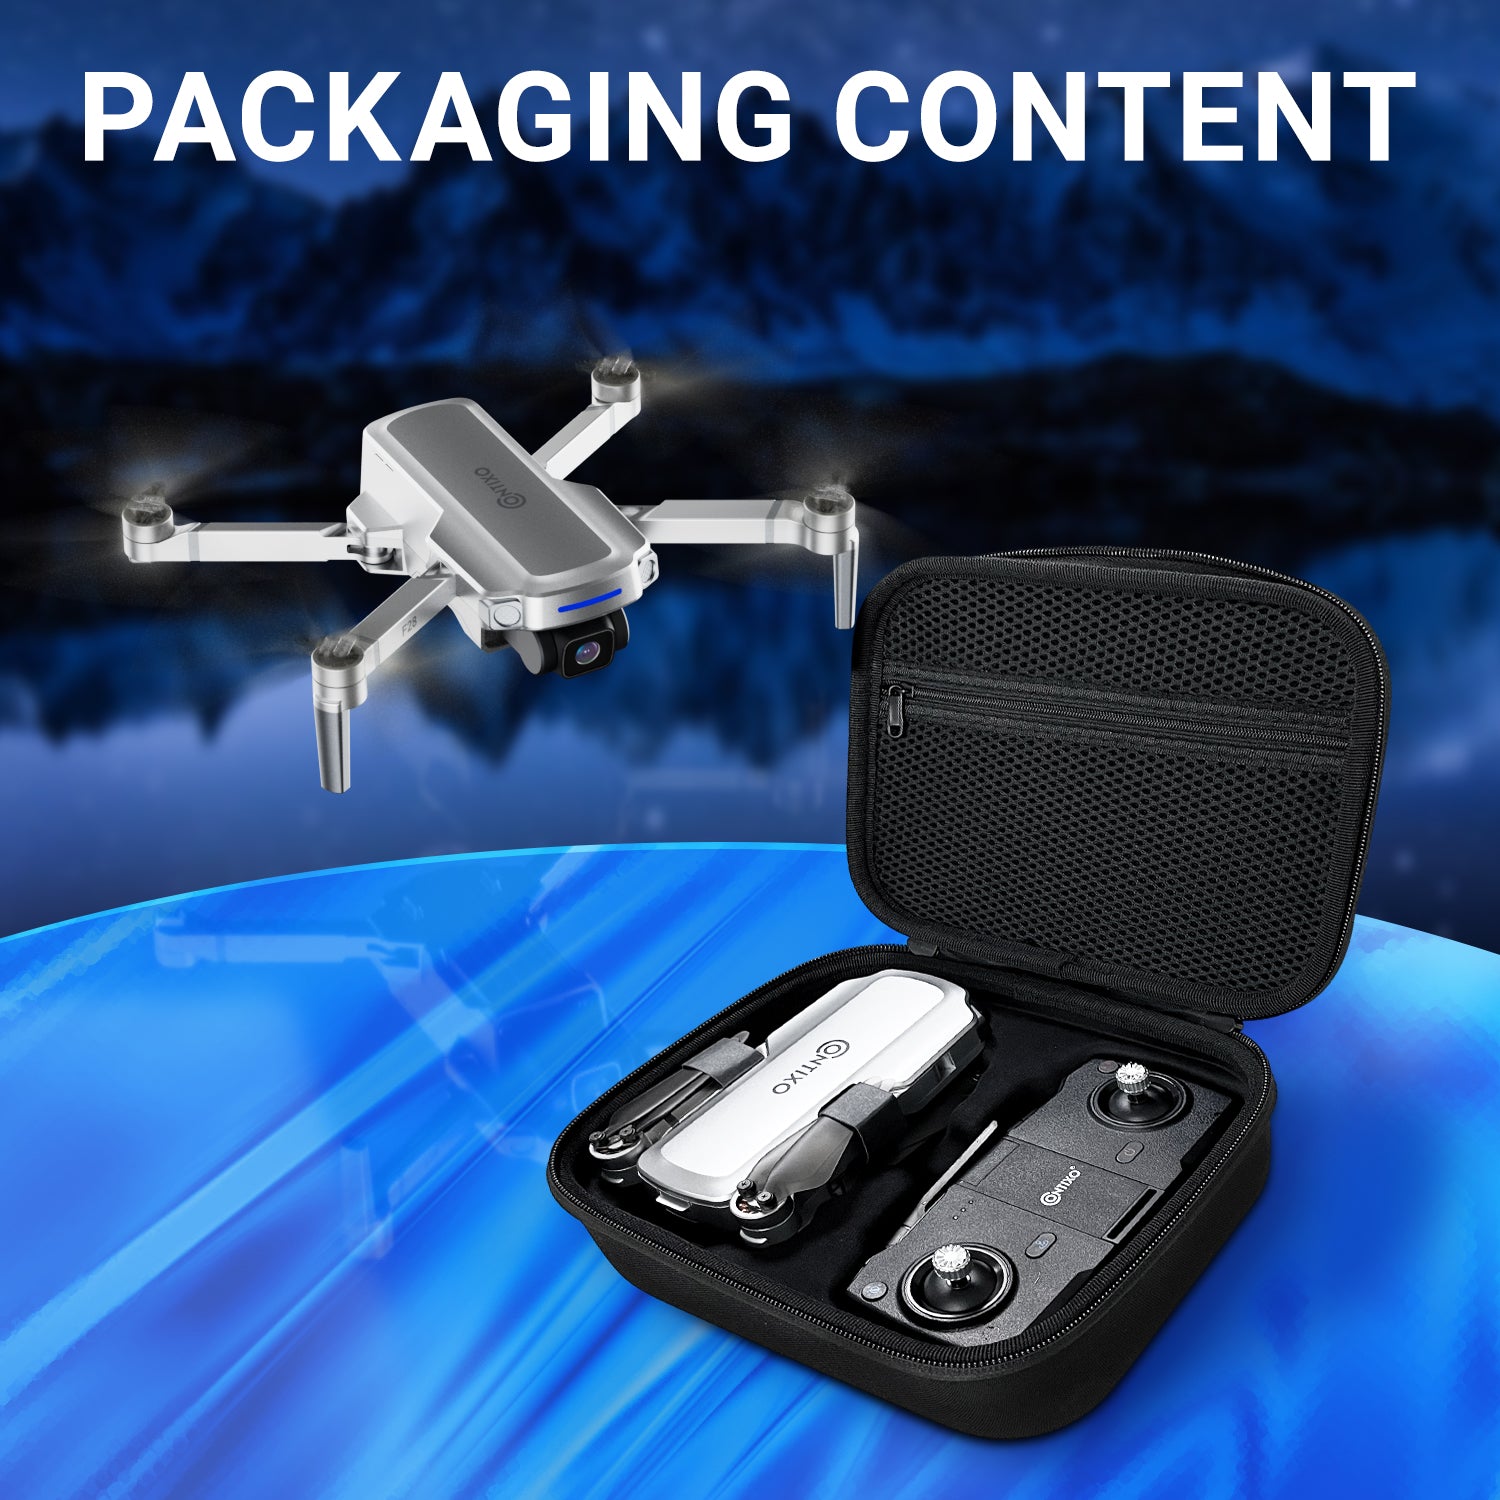 Contixo F28 Foldable Drone with 2K FHD Camera and Carrying Case